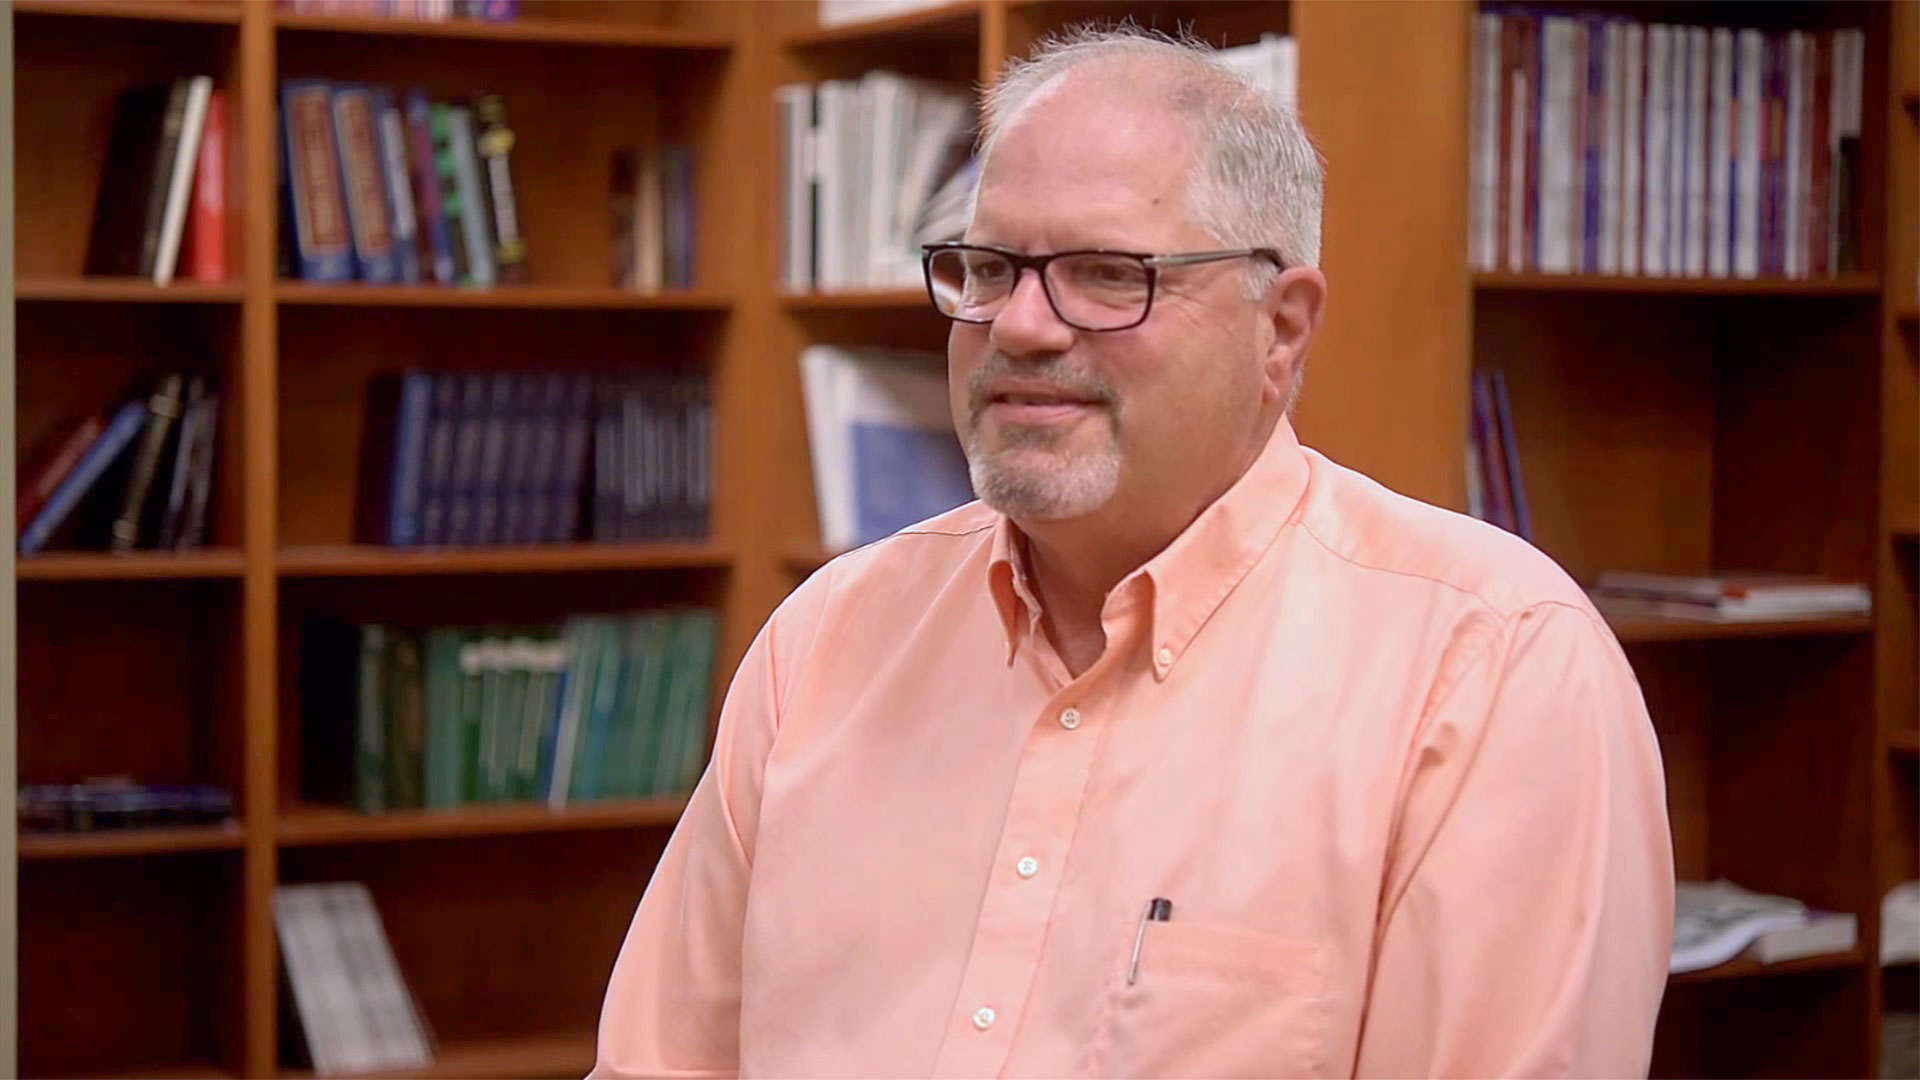 UF Health Neurology patient Steve Rhyne discusses his stroke care at UF Health Jacksonville